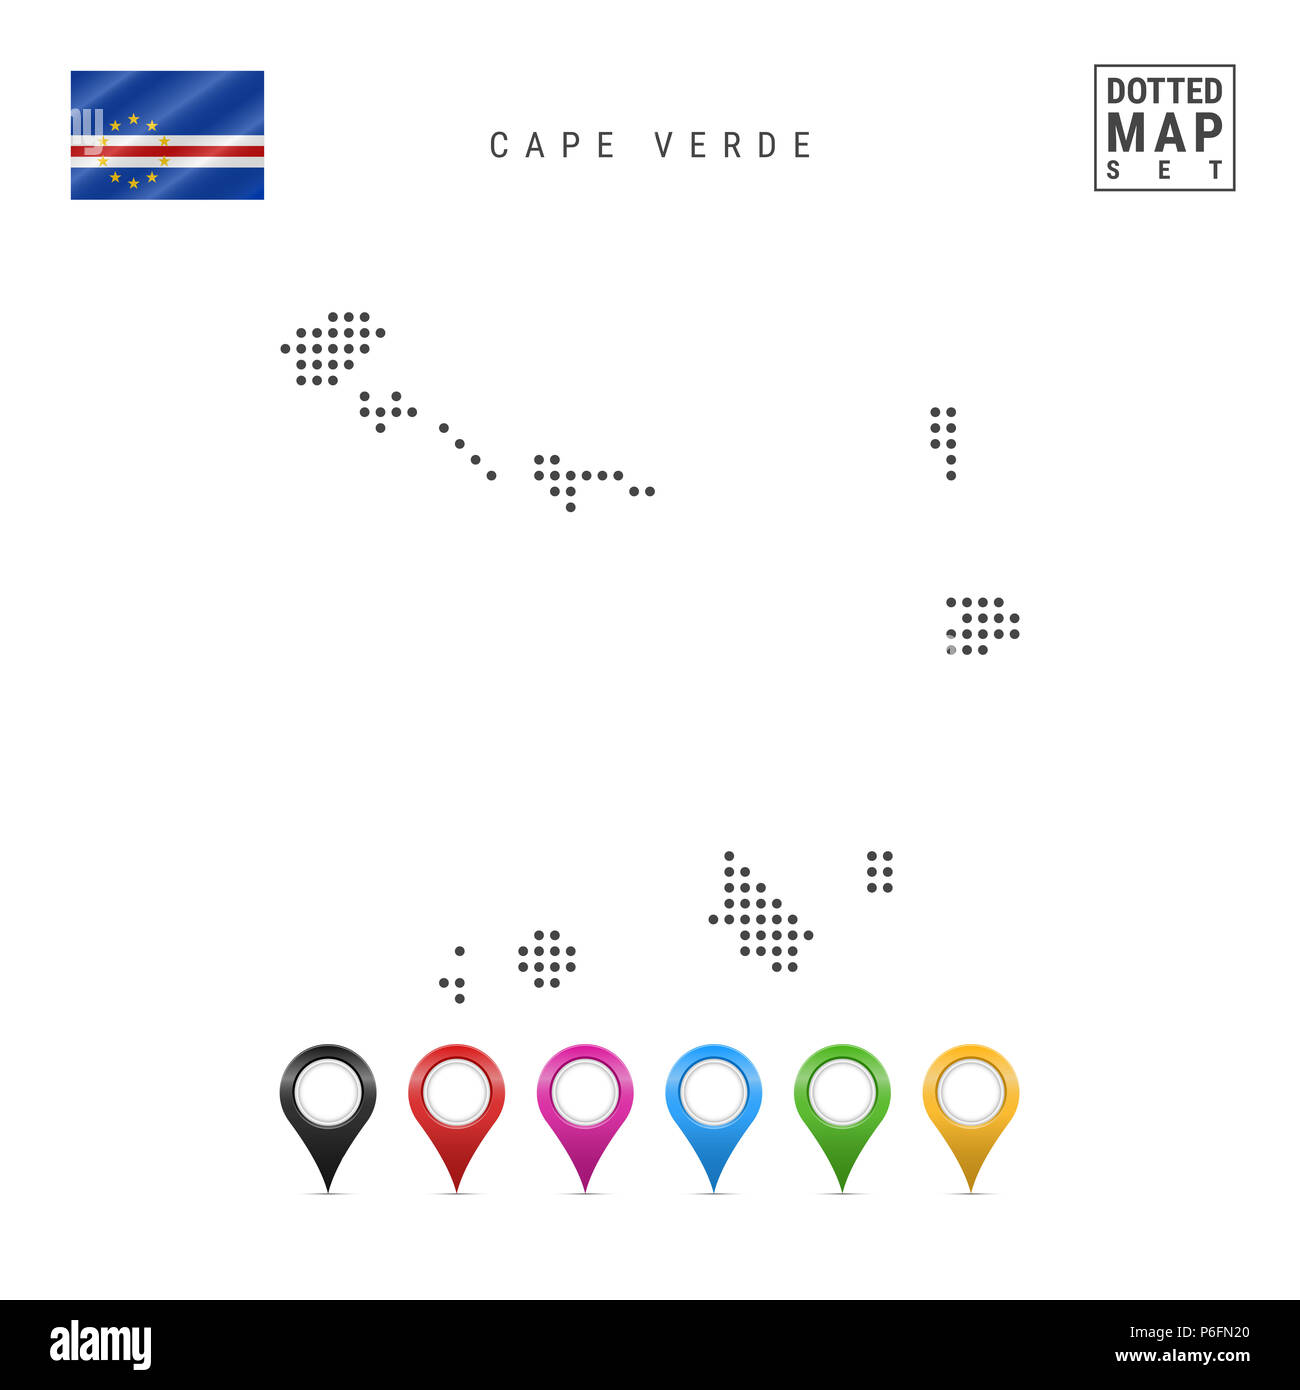 Dotted Map of Cape Verde. Simple Silhouette of Cape Verde. The National Flag of Cape Verde. Set of Multicolored Map Markers. Illustration Isolated on  Stock Photo